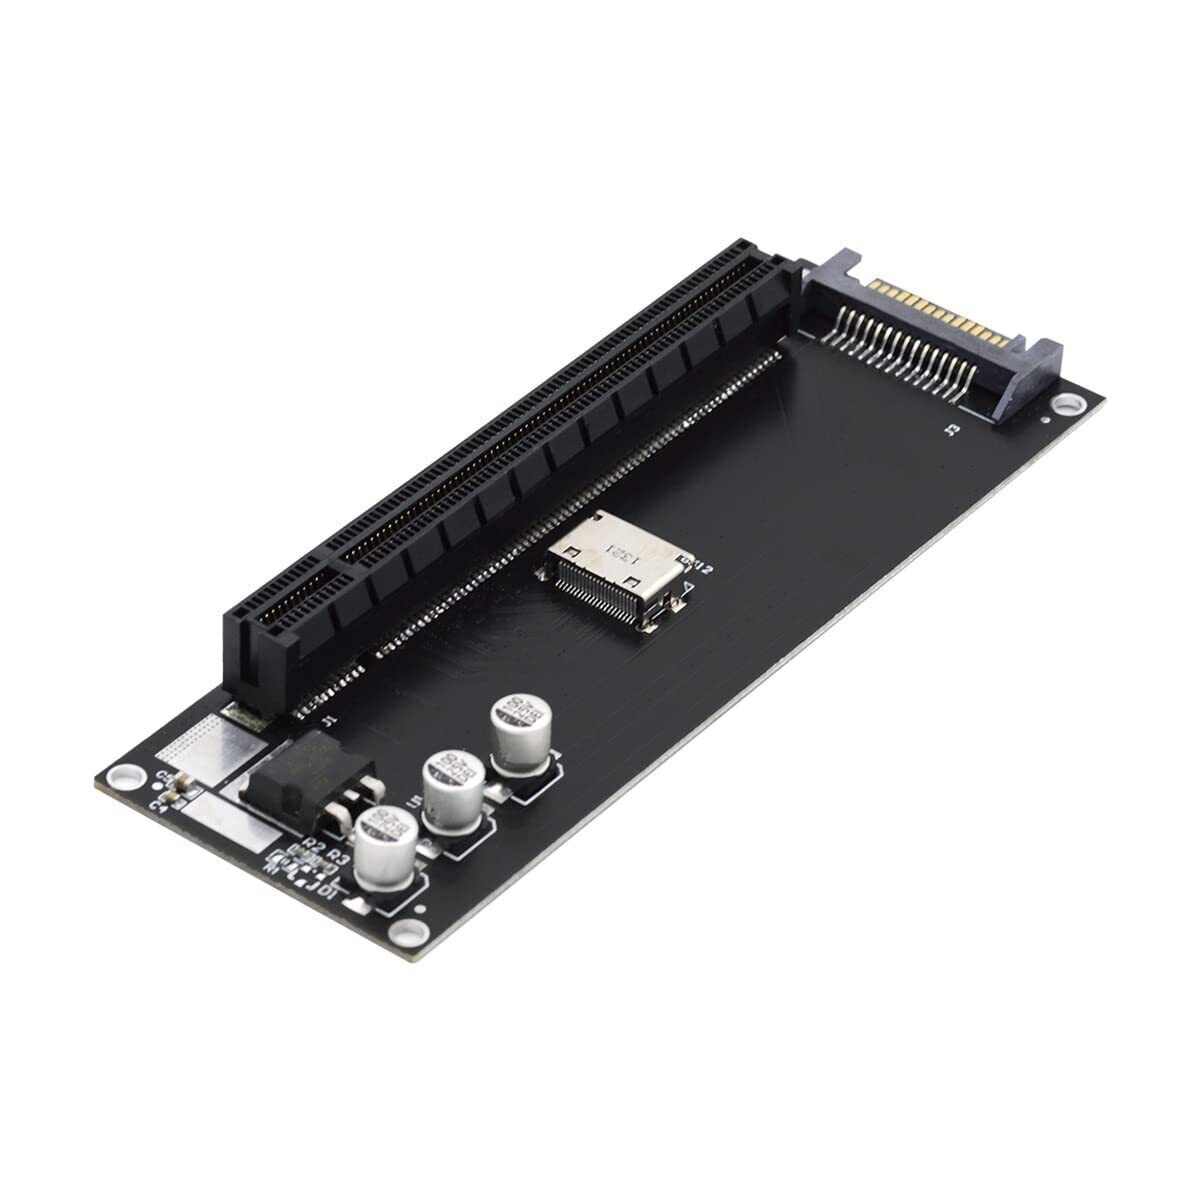 Cablecc Oculink SFF-8612 SFF-8611 to PCIE PCI-Express 16x 4X Adapter with SAT...